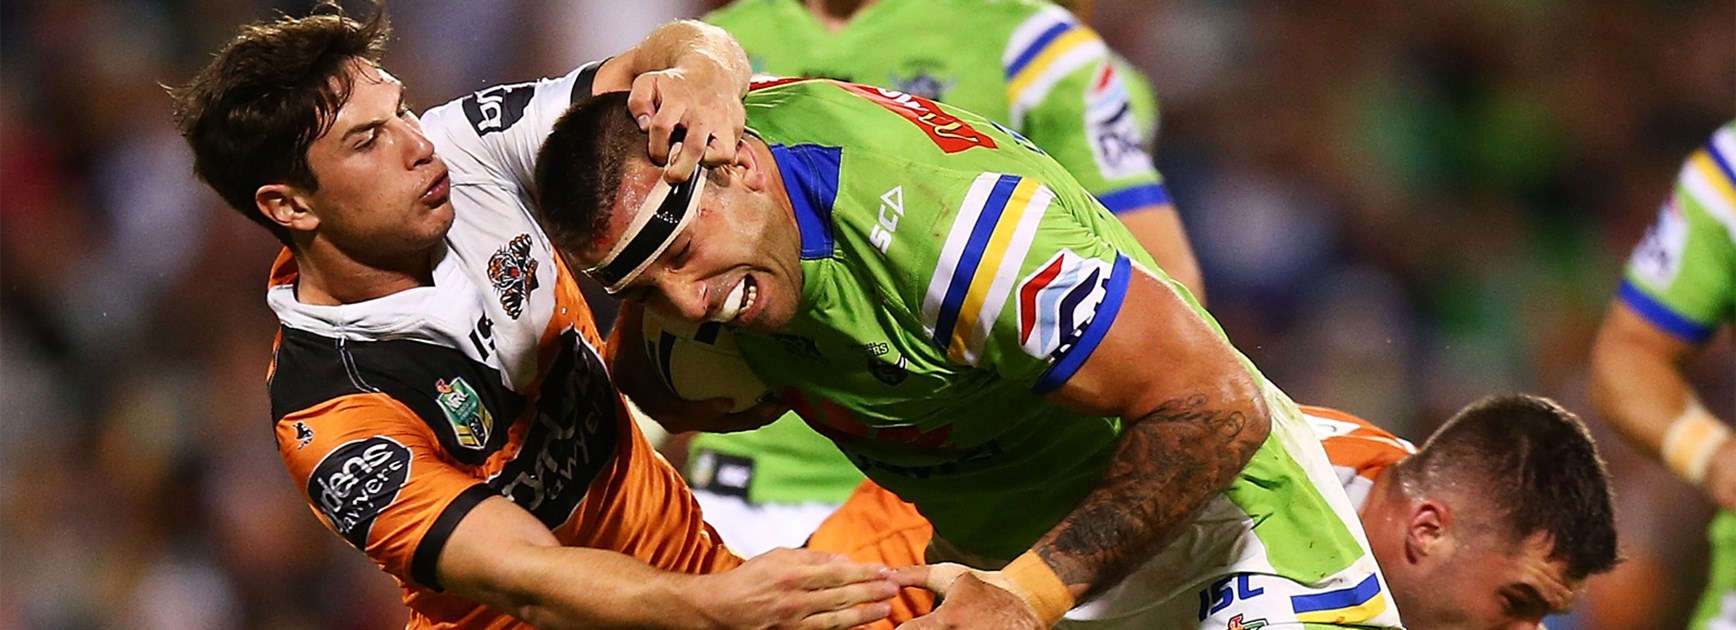 Paul Vaughan charged to a try for Canberra in their Round 8 win over the Tigers.Paul Vaughan charged to a try for Canberra in their Round 8 win over the Tigers.